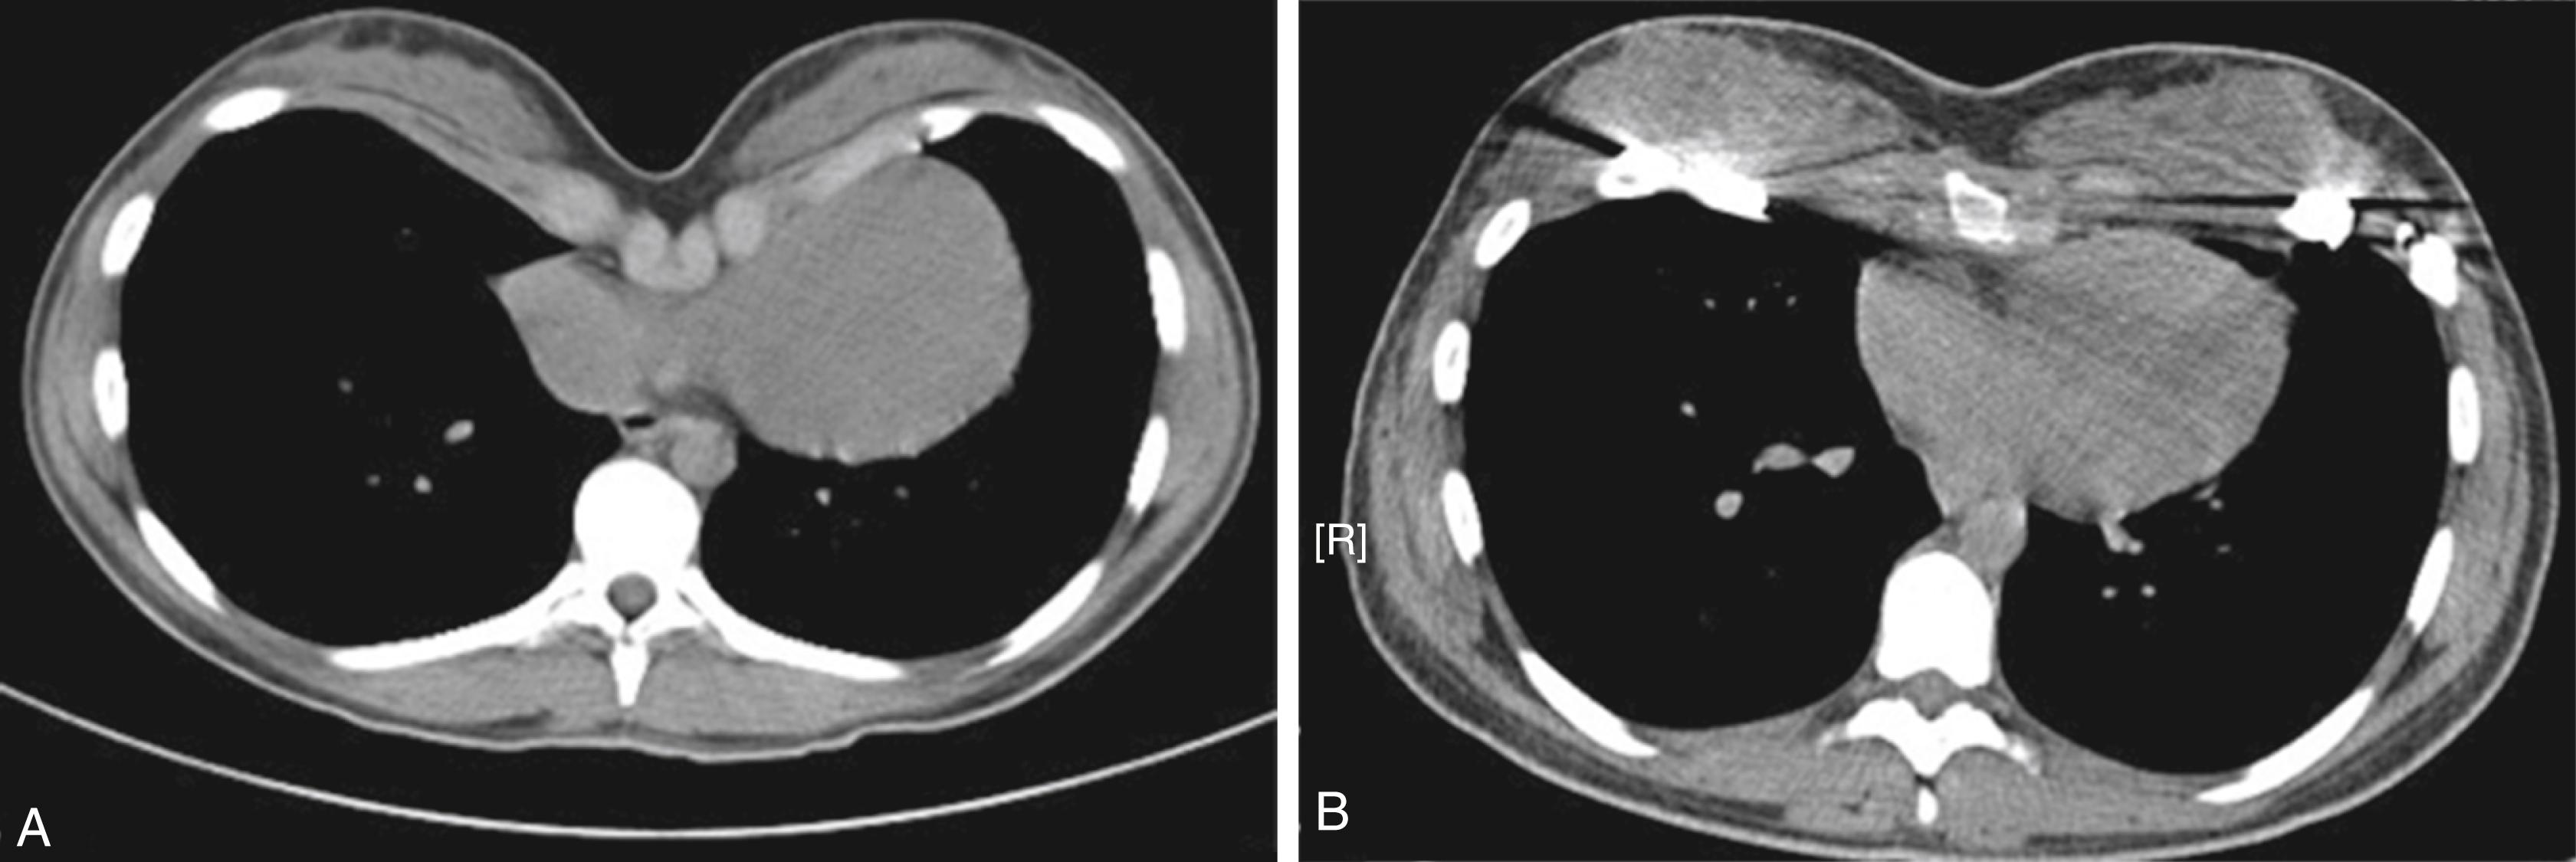 Fig. 39.1, Transverse section of a computerized tomography (CT) scan of a patient with pectus excavatum, (A) before and (B) after Nuss correction. Note the cardiac compression seen before correction.